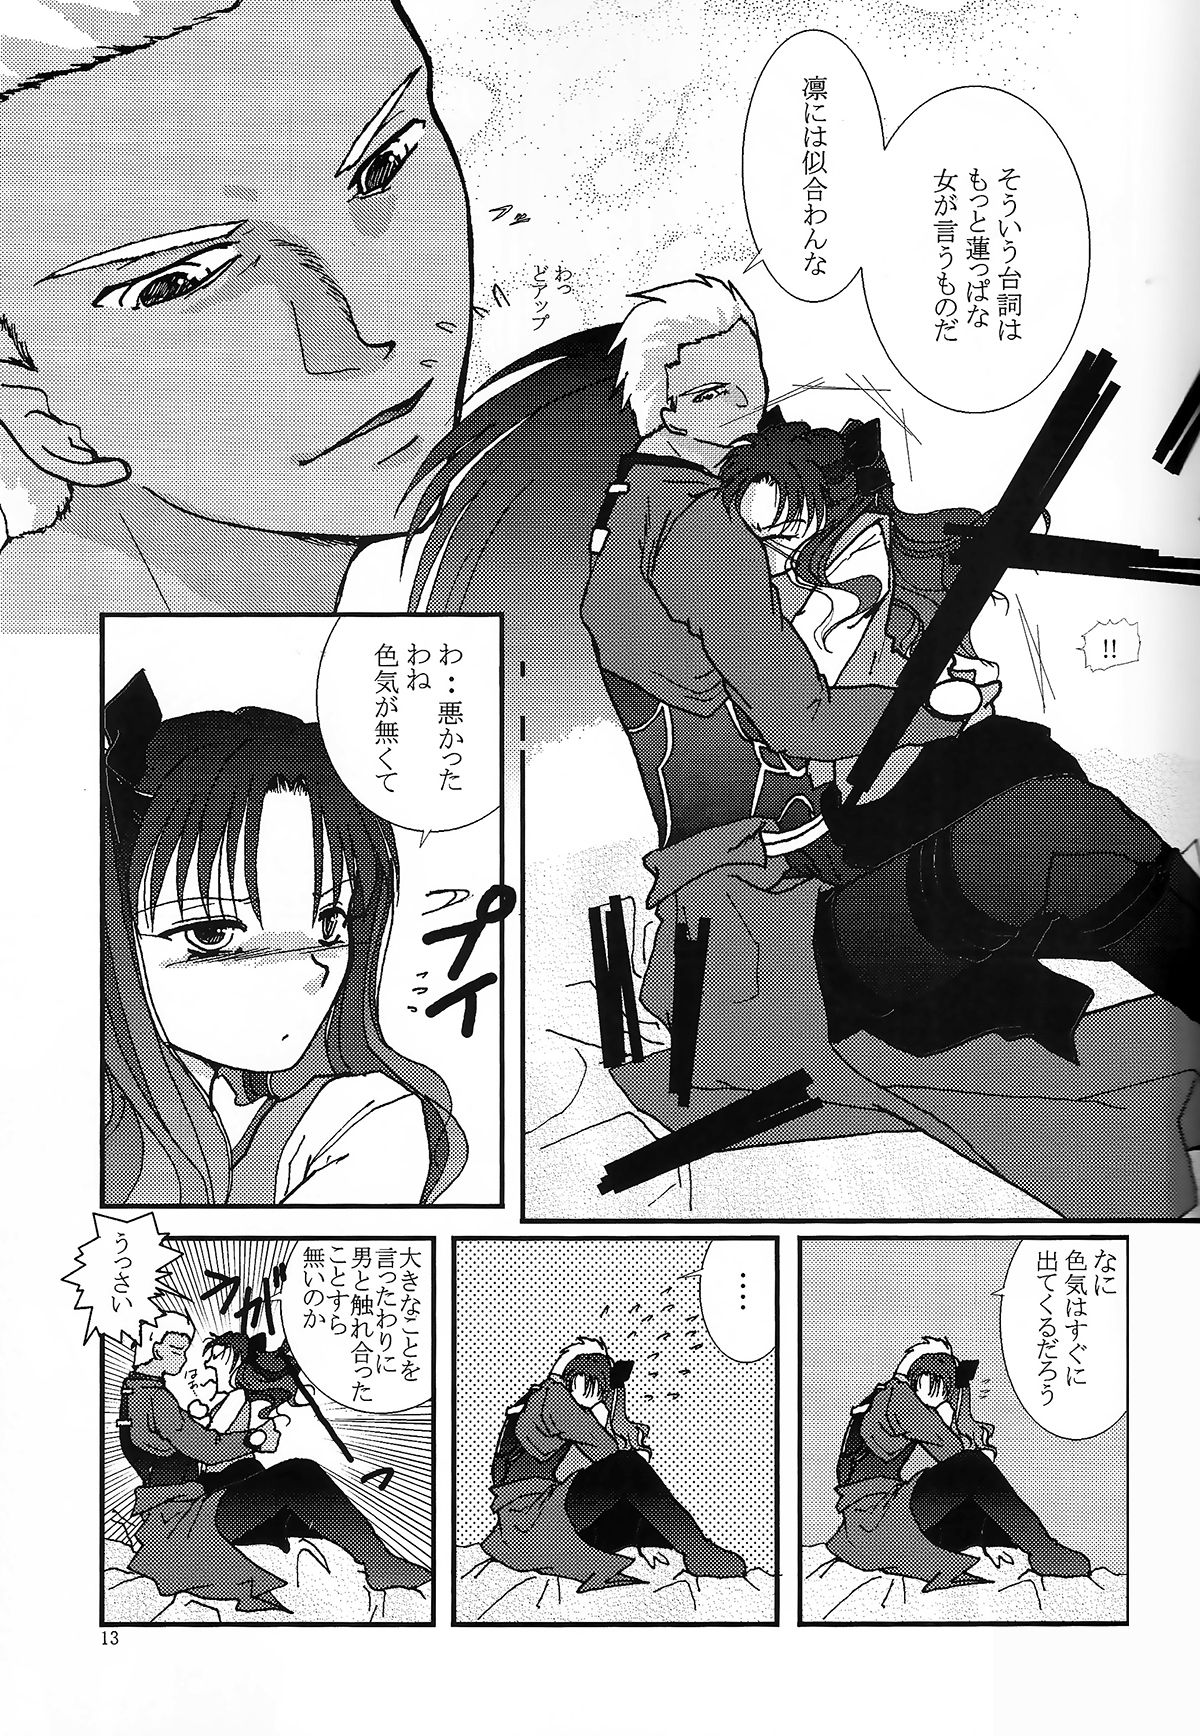 (SC24) [Takeda Syouten (Takeda Sora)] Question-7 (Fate/stay night) page 11 full